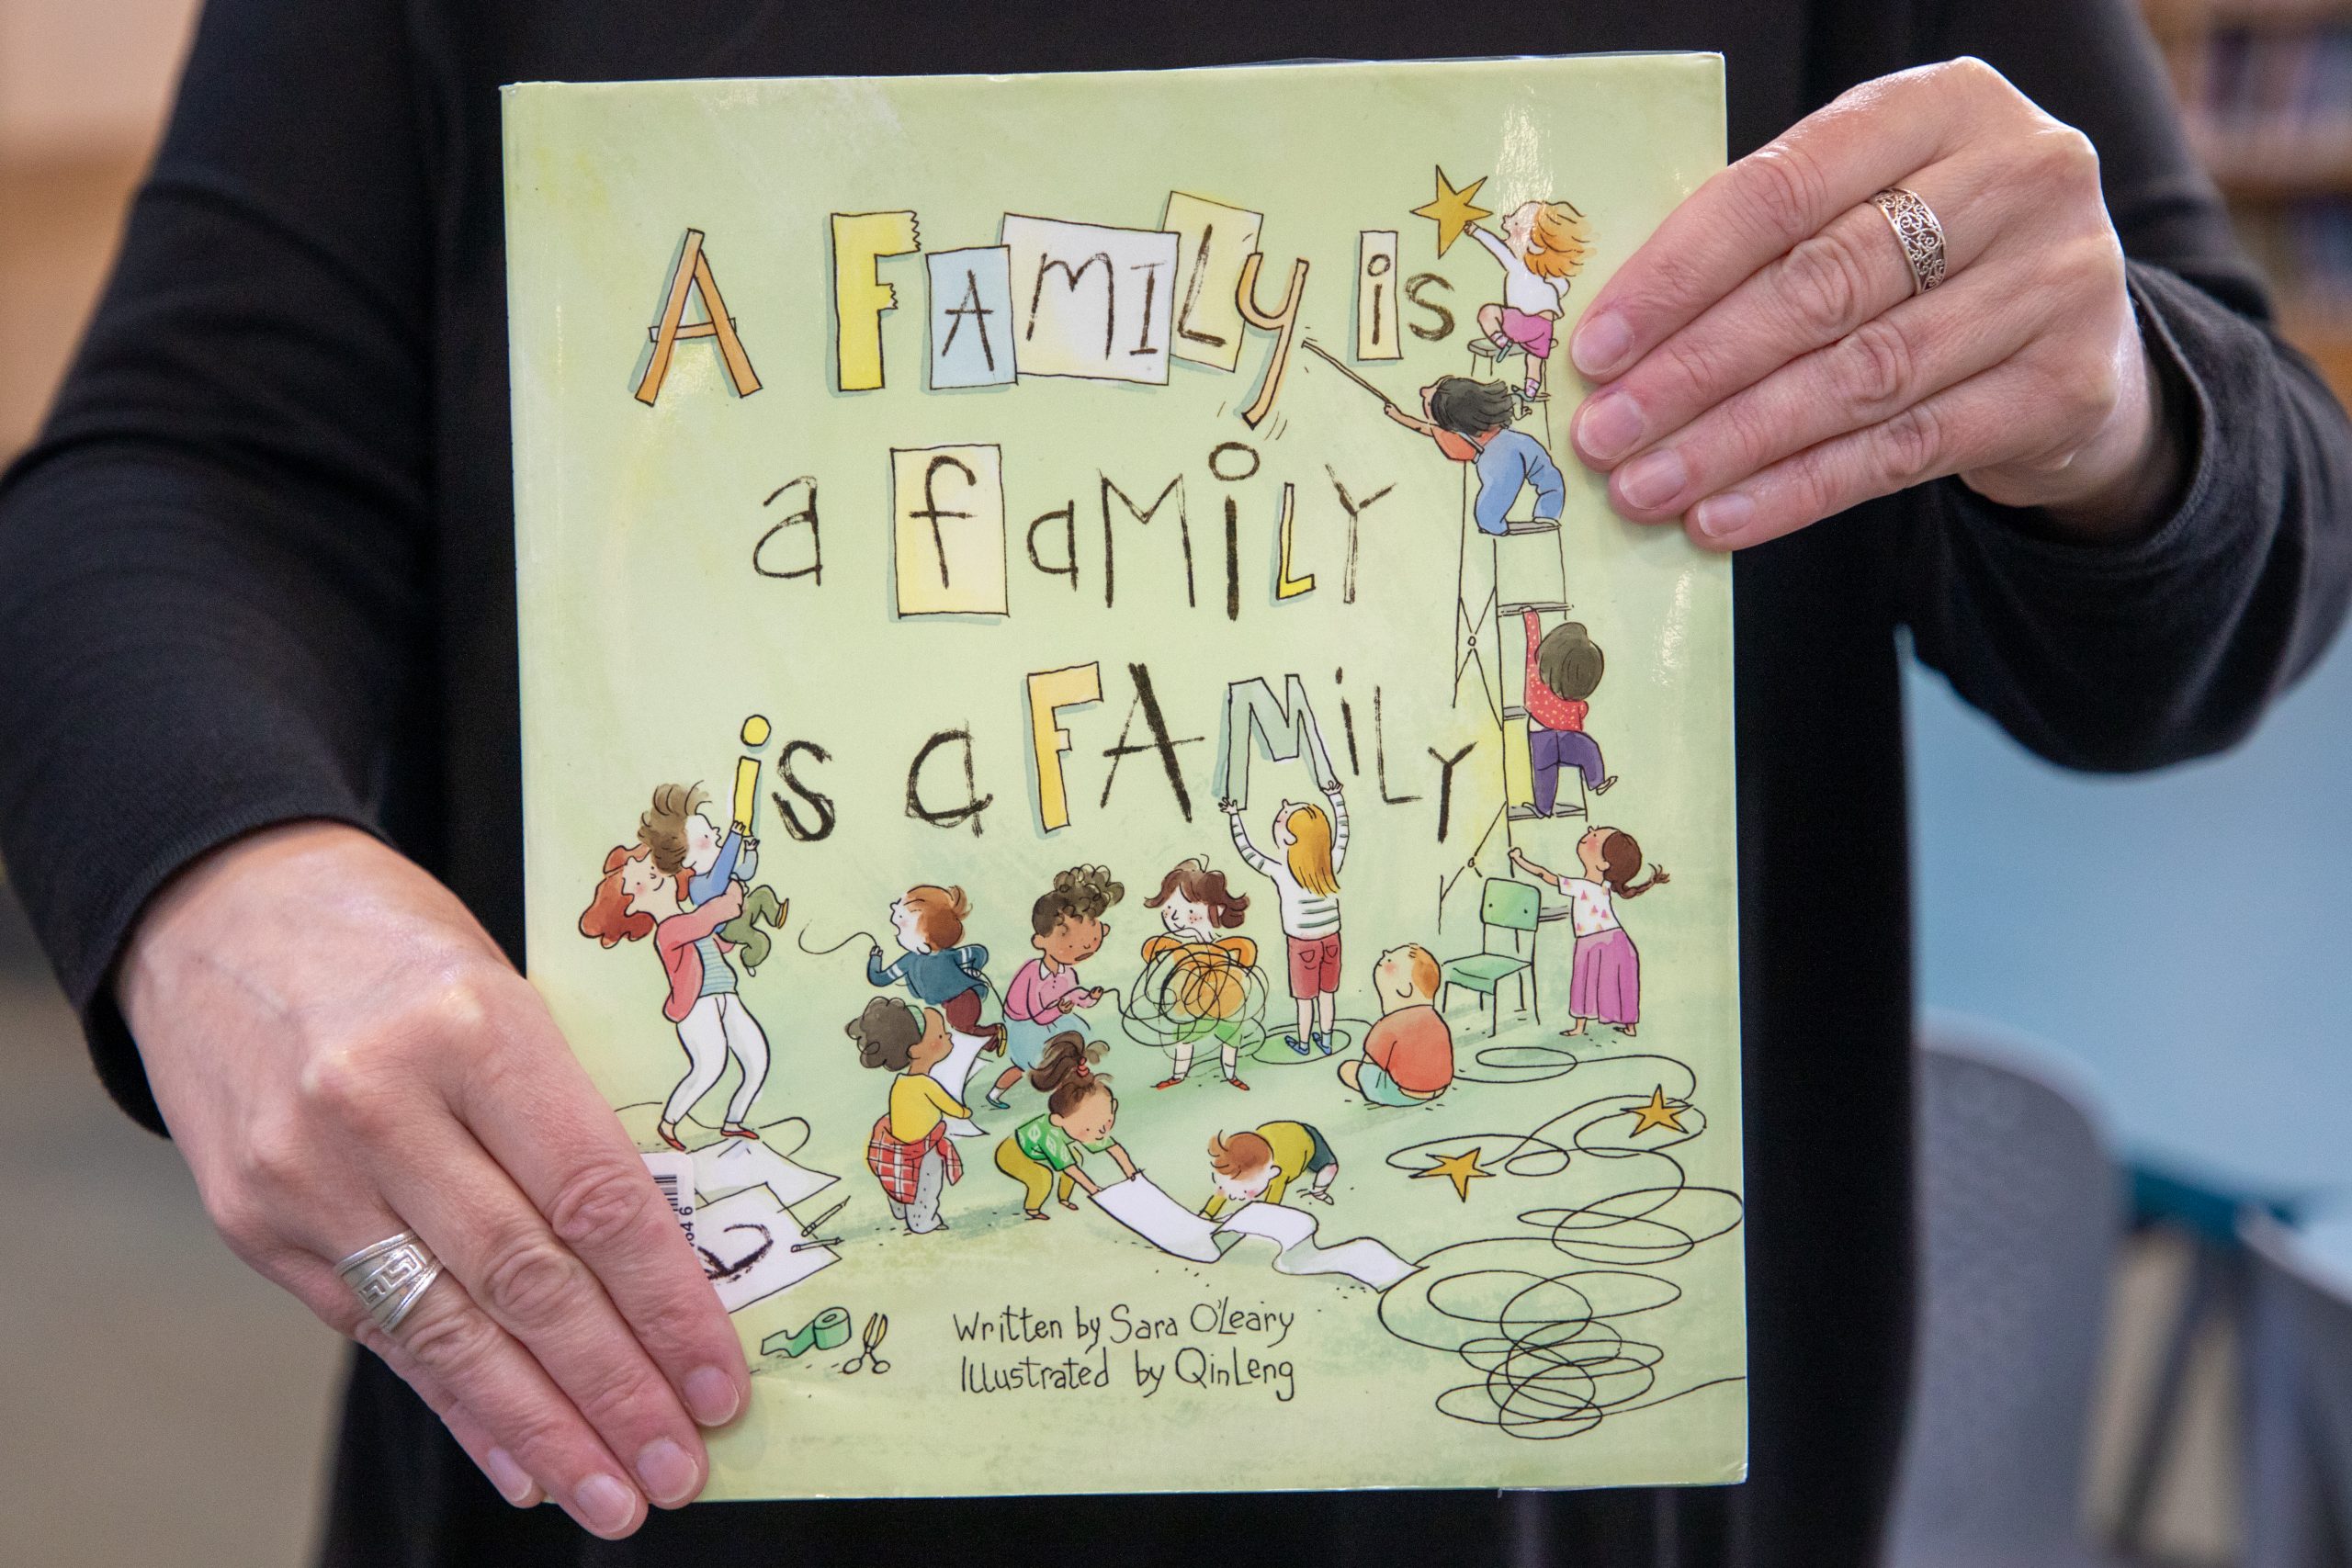 The cover of the book "A Family Is a Family Is a Family" by Sara O'Leary.